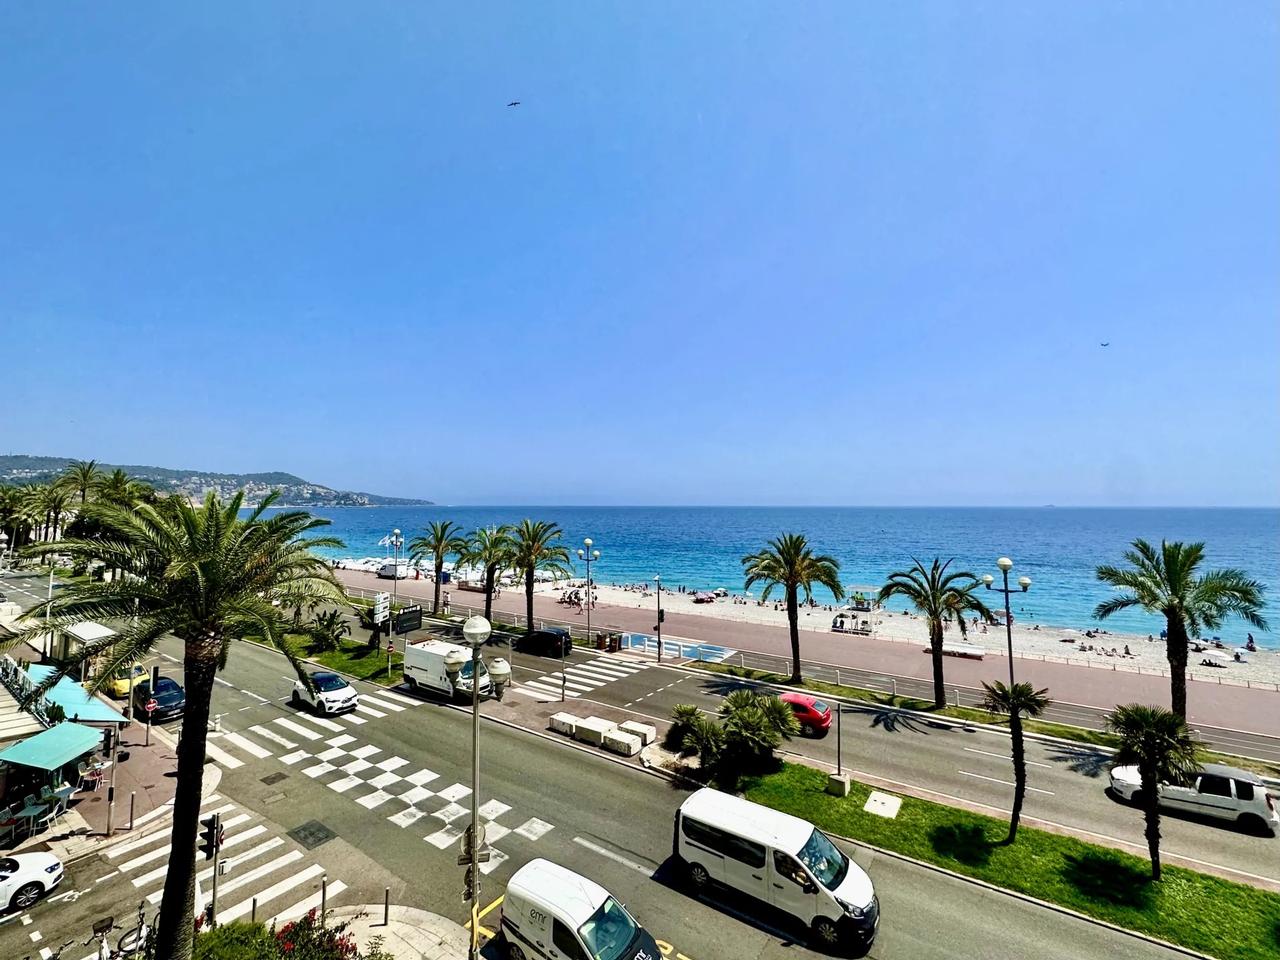 Nice Riviera - Real estate agency Nice Côte d'Azur | Appartement  3 Rooms 118.06m2  for sale  1 495 000 €